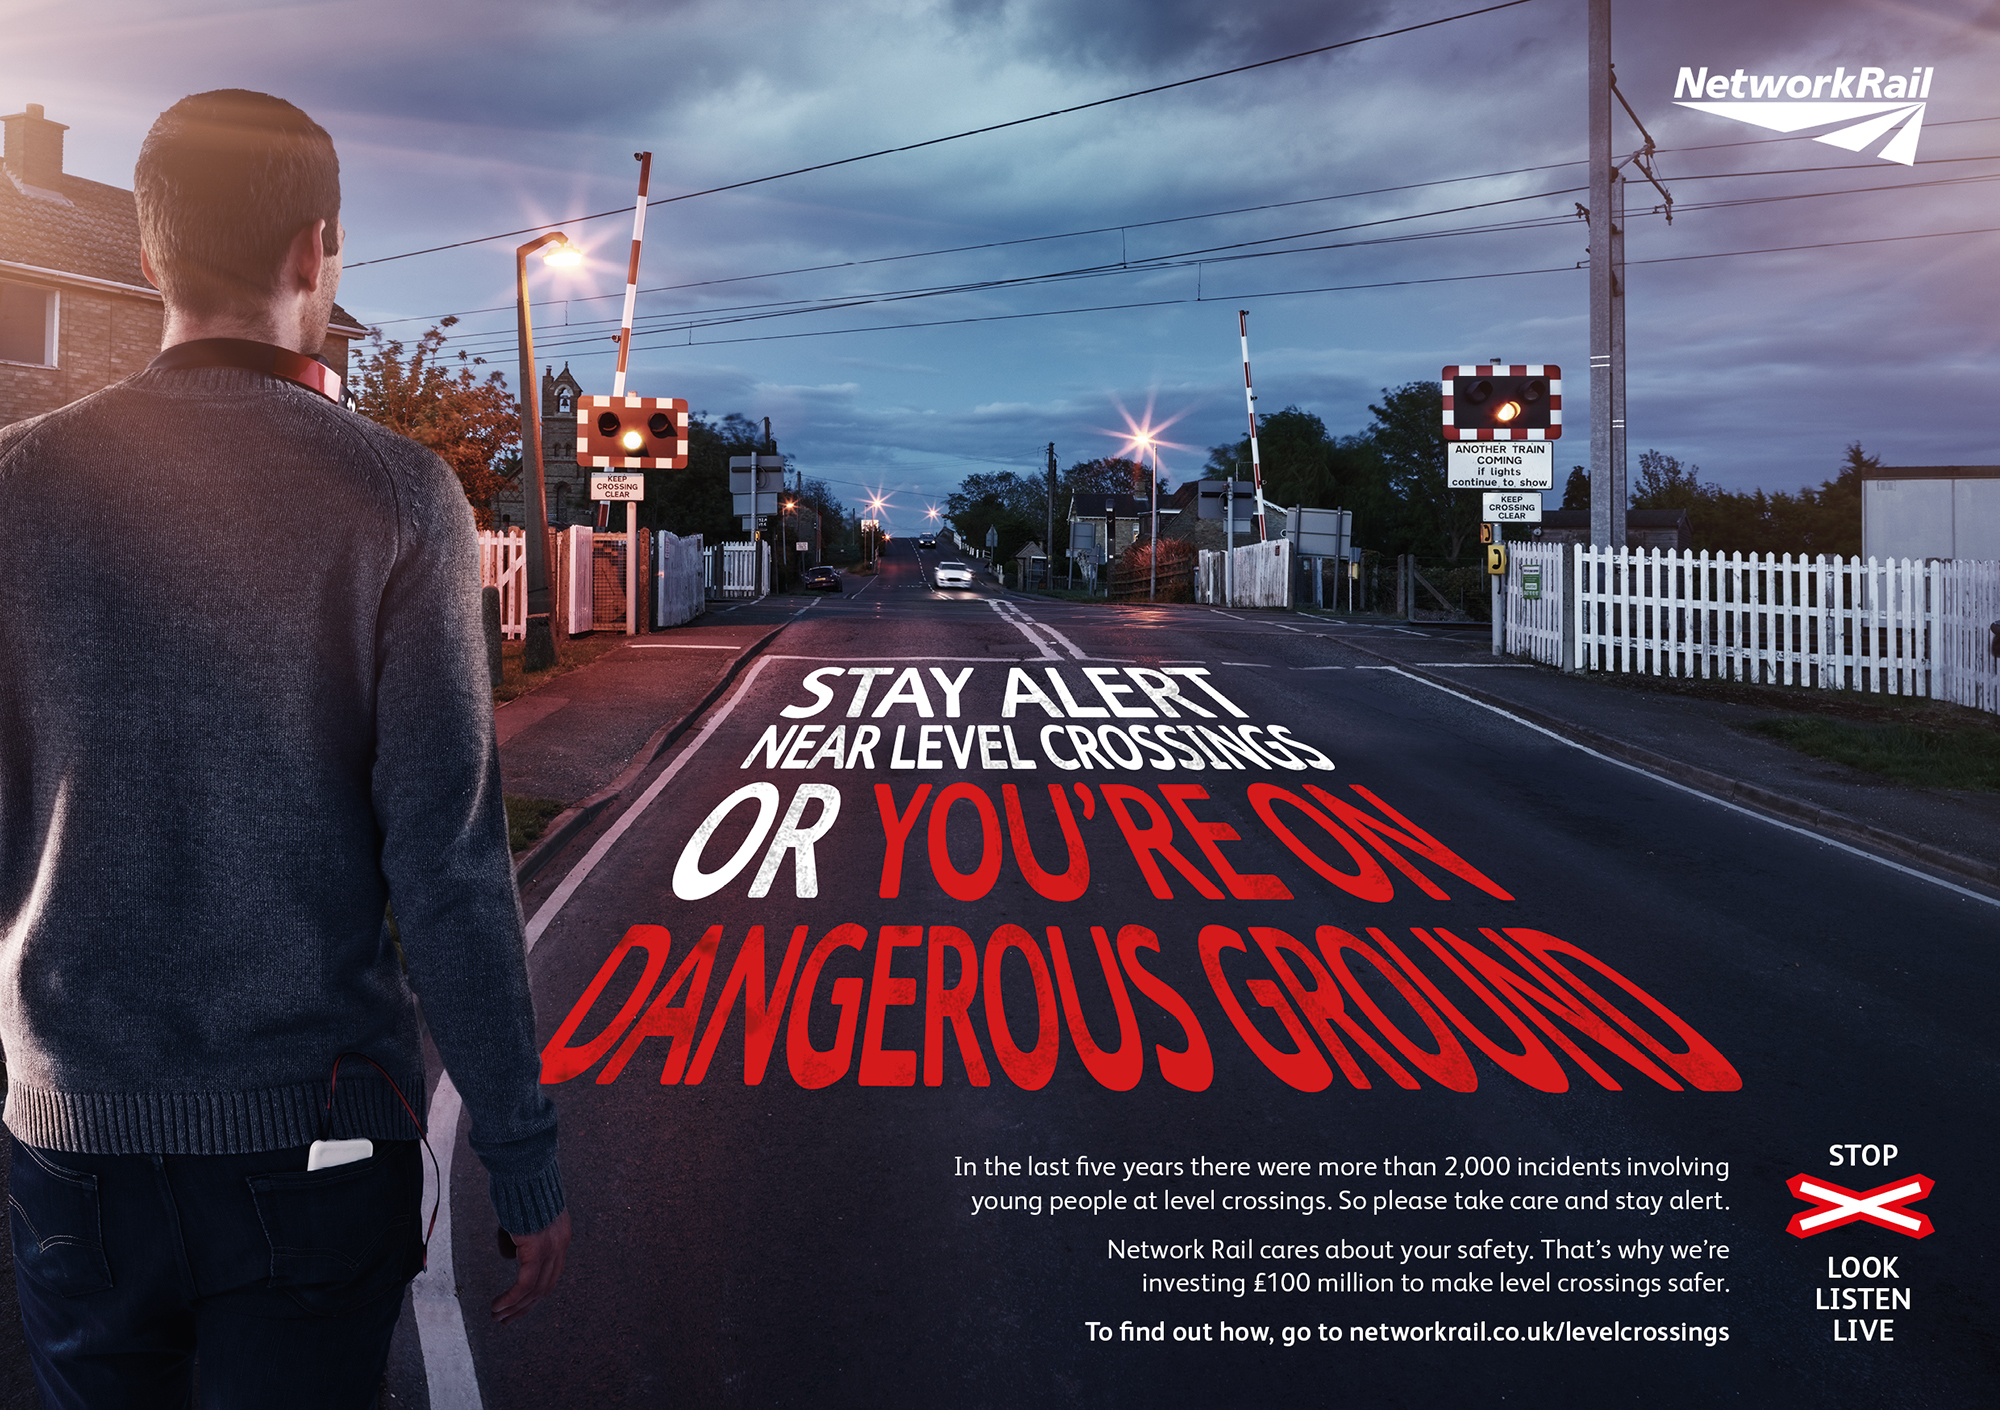 Students In The East Of England Targeted In New Level Crossing Safety Campaign